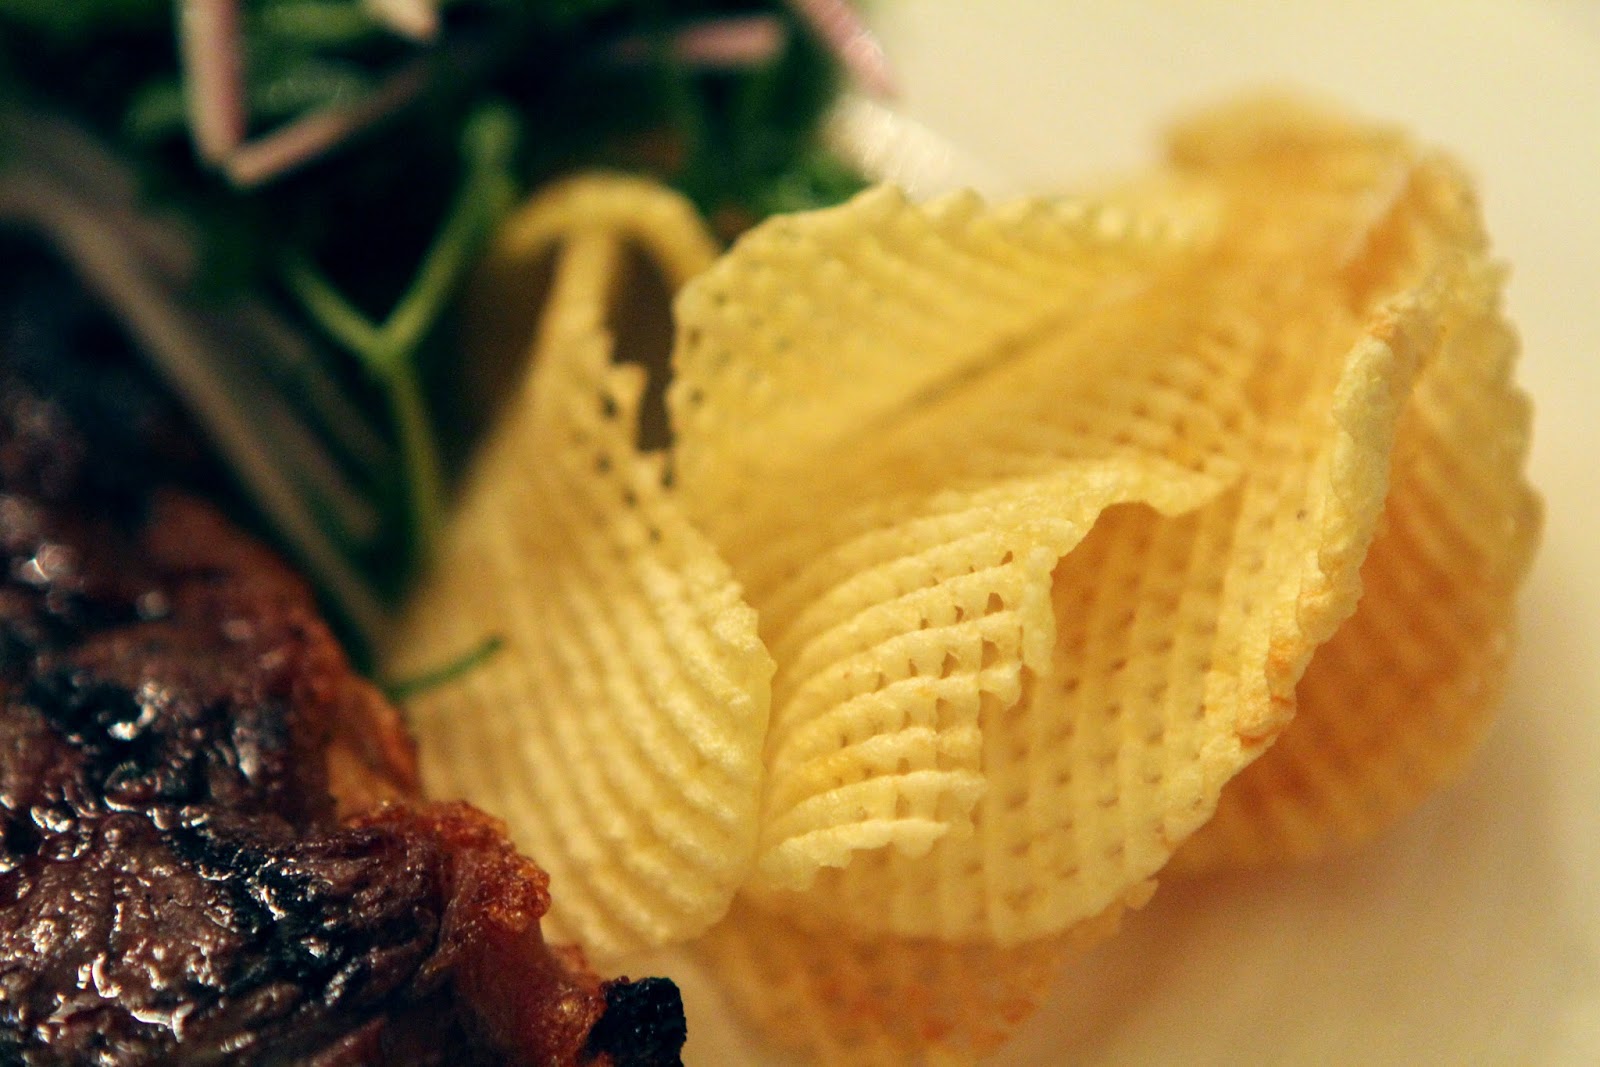 The Savoy grill steak and chips